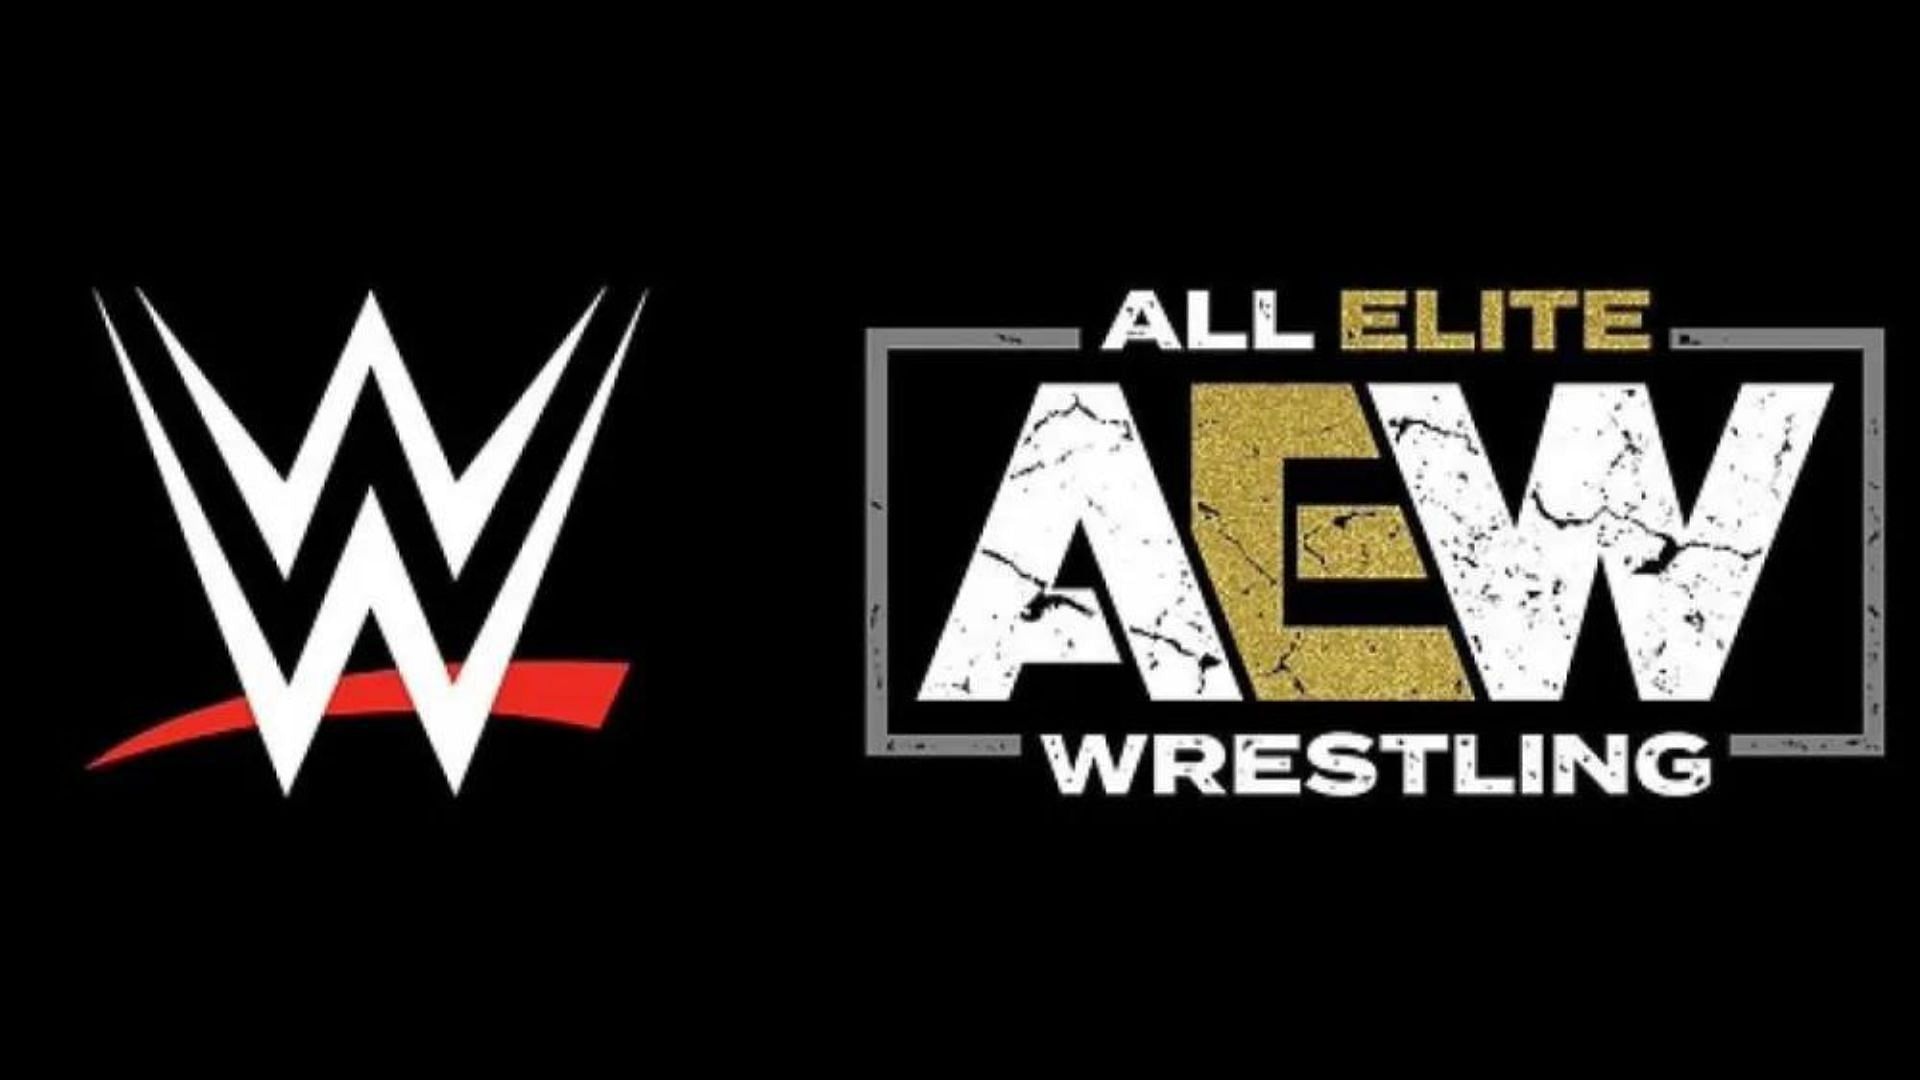 WWE is the primary rival of AEW.